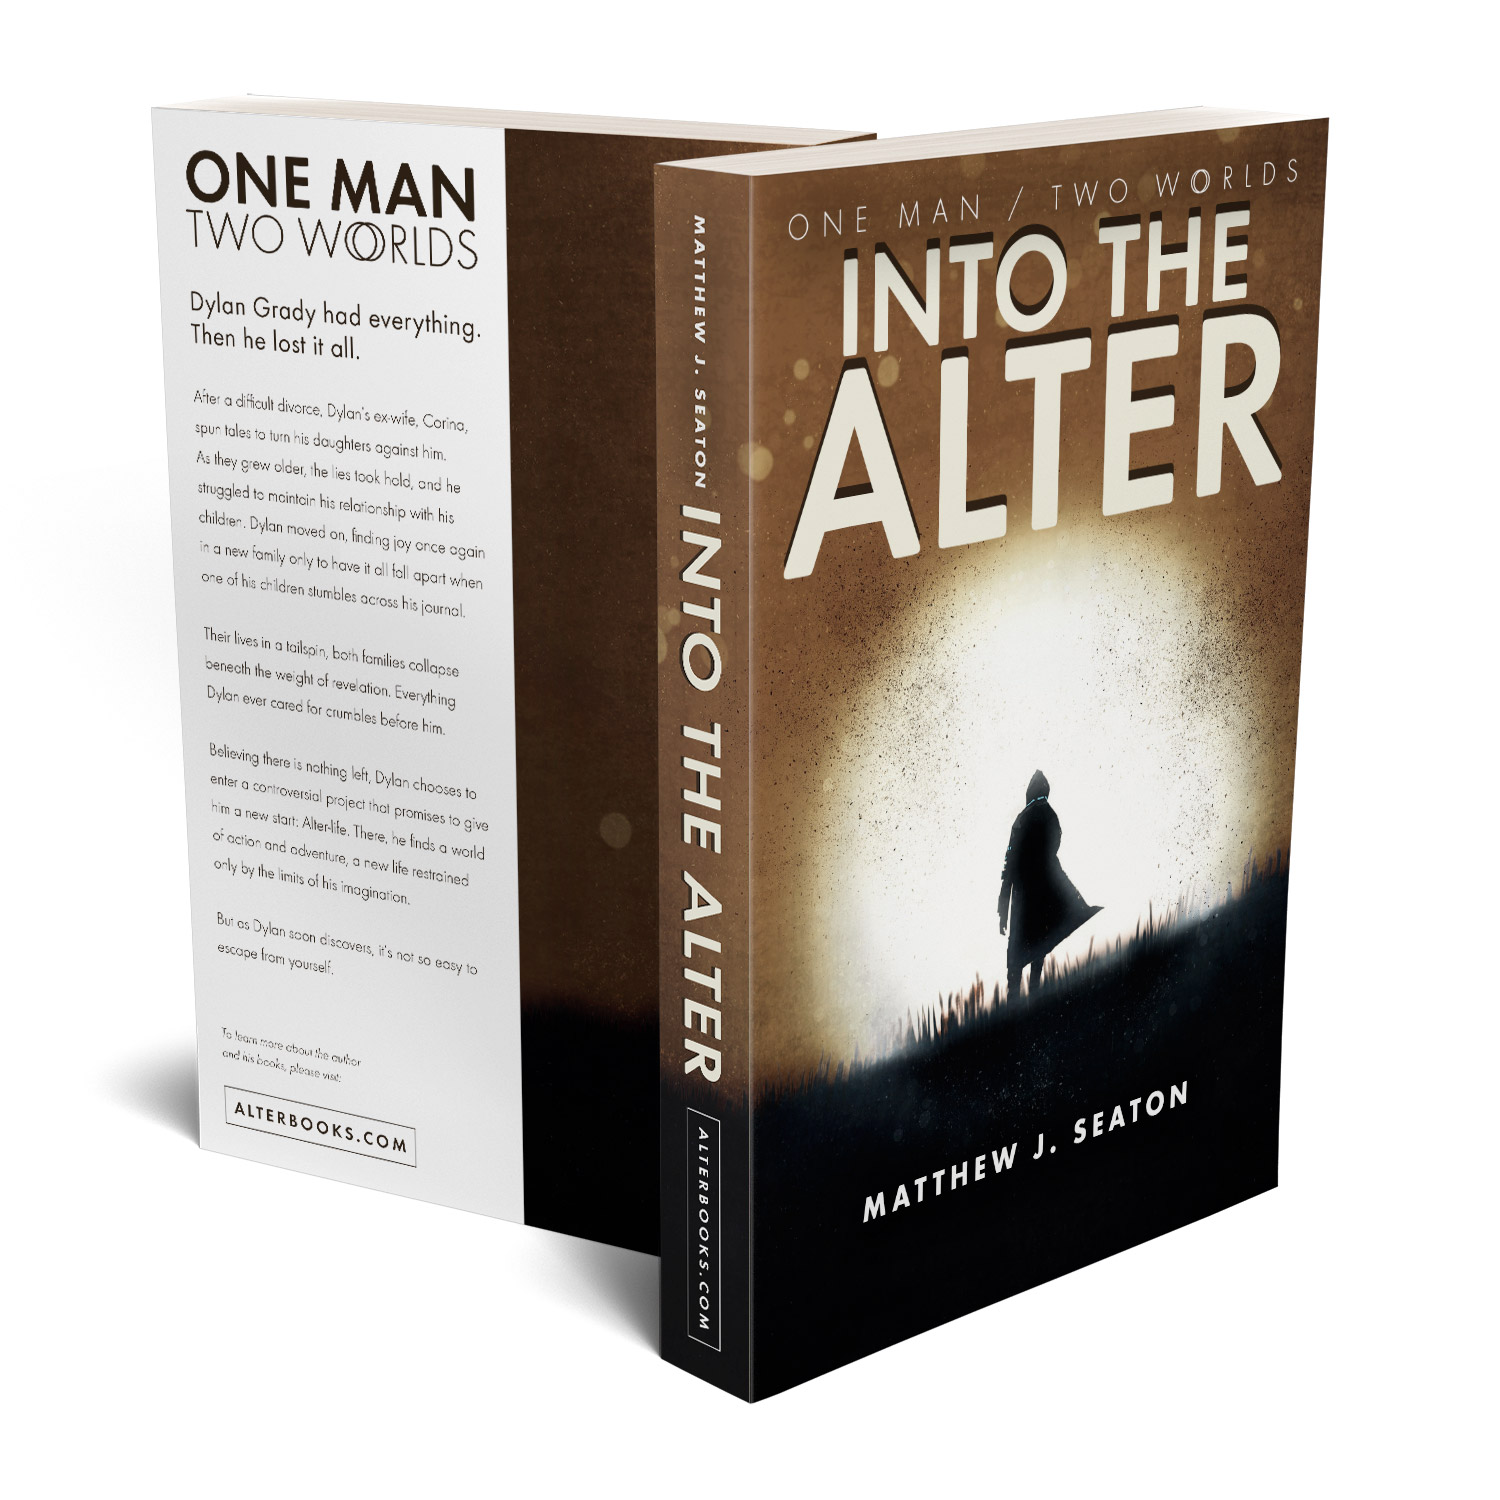 'Into The Alter' is a swarming, apocalyse scifi novel. The author is Matthew Seaton. The book cover design and interior formatting are by Mark Thomas. To learn more about what Mark could do for your book, please visit coverness.com.